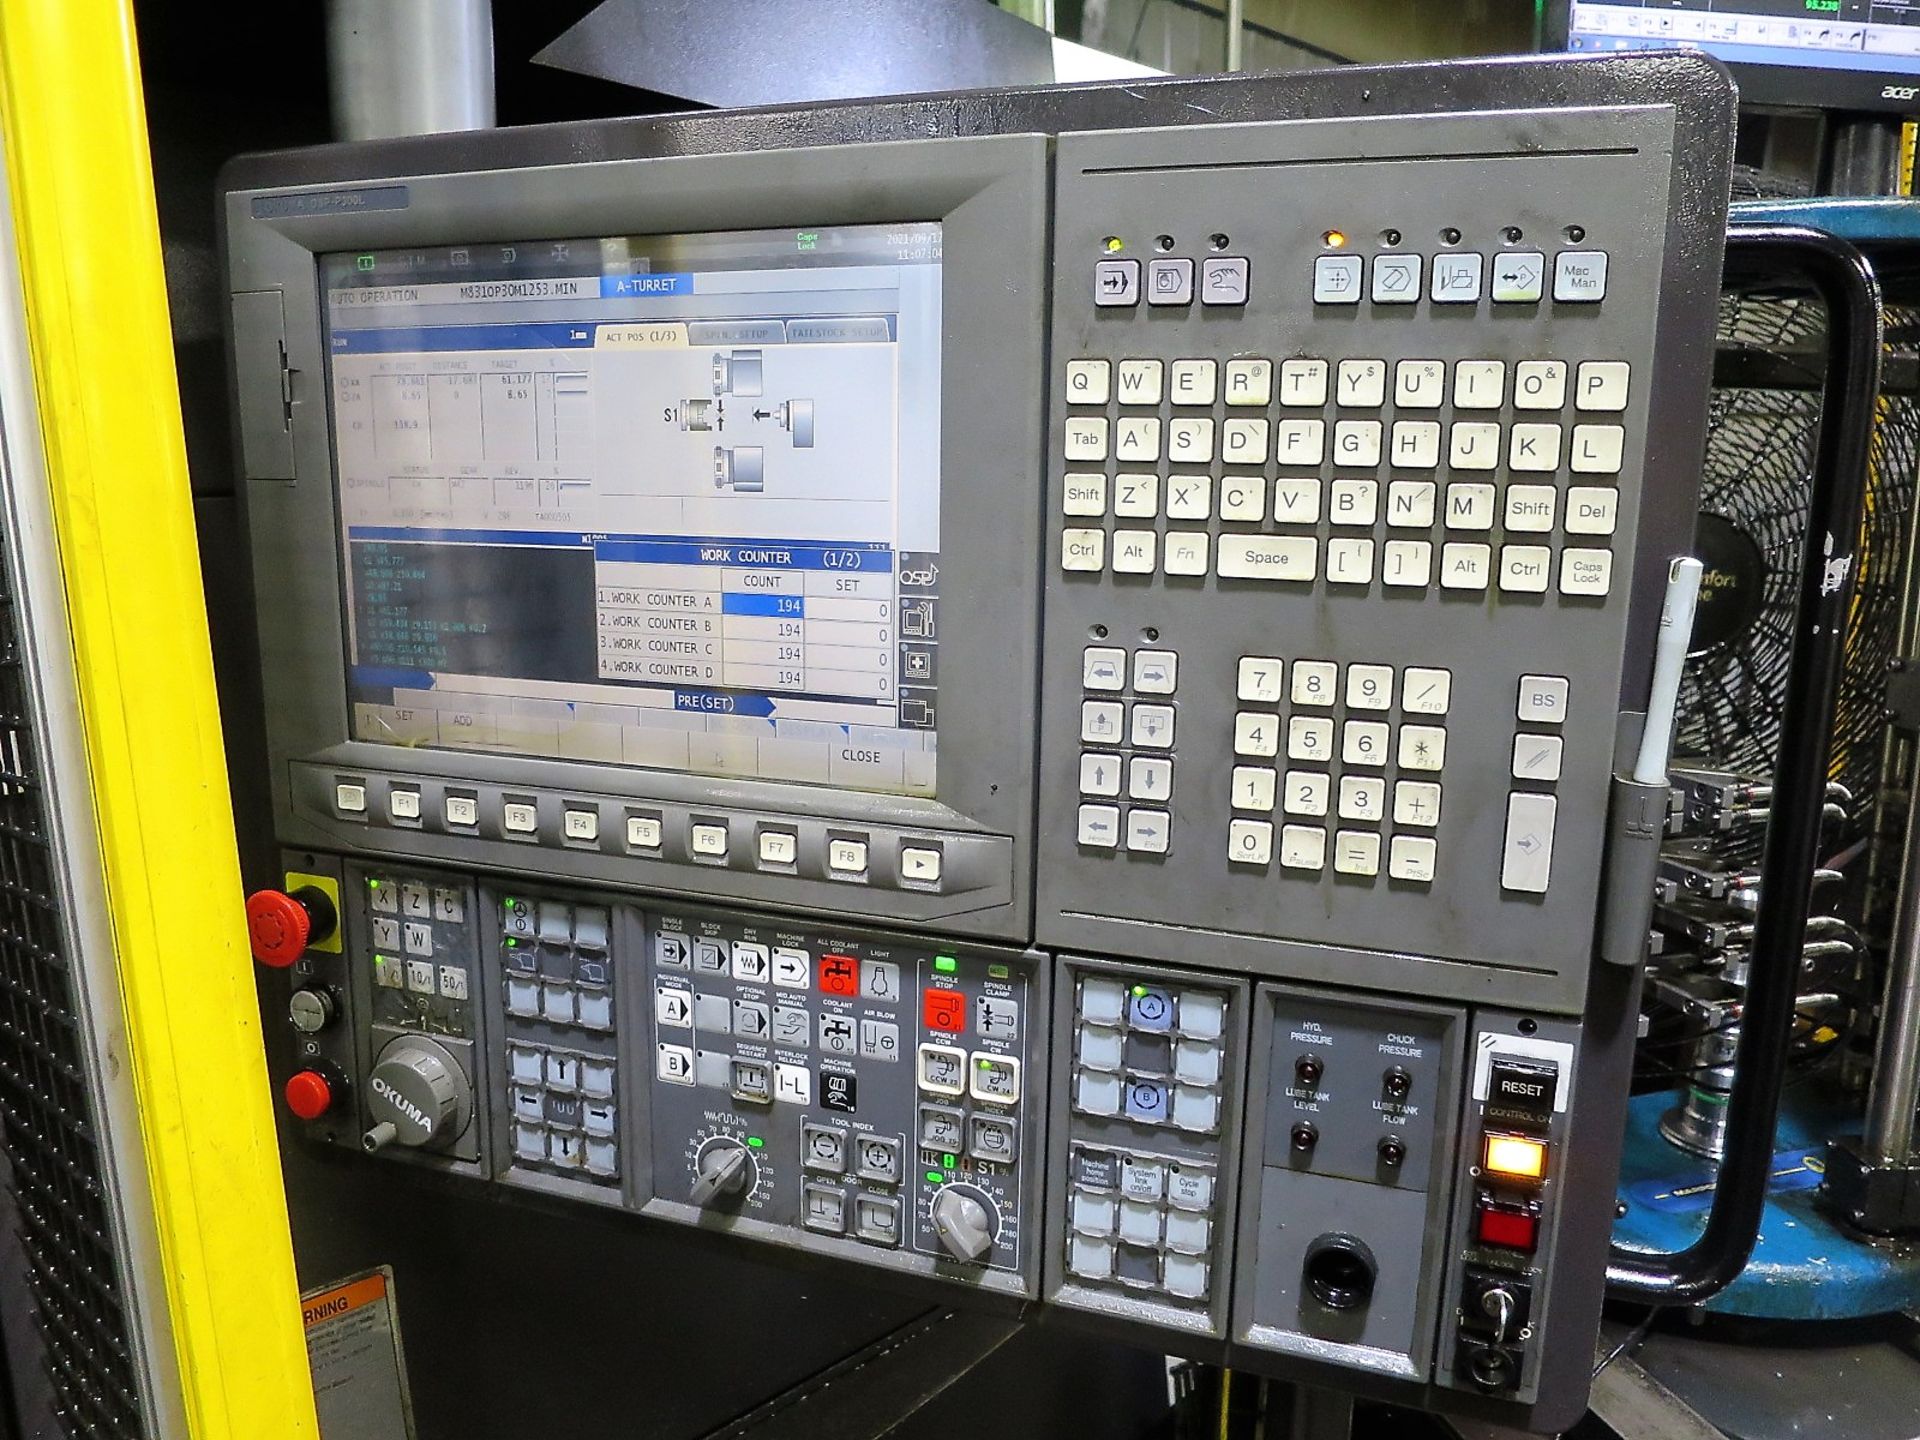 ***SOLD SOLD SOLD*** OKUMA LU-3000 EX 2SC-600 4-AXIS TWIN TURRENT CNC LATHE, NEW 2015, S/N 184757 - Image 2 of 7